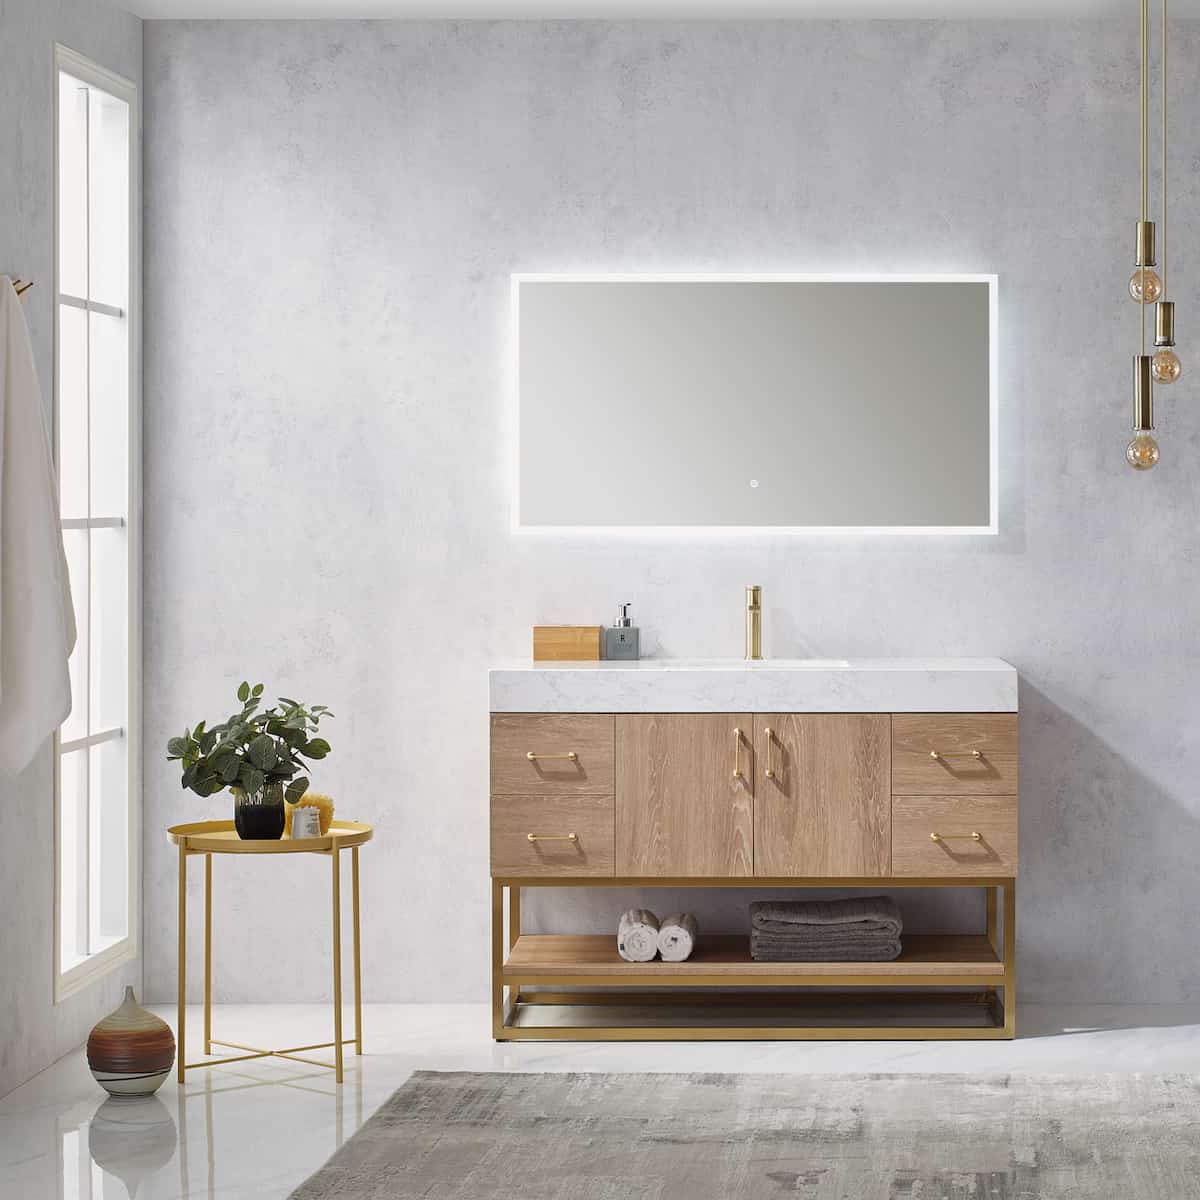 Vinnova Alistair 48 Inch Freestanding Single Vanity in North American Oak and Brushed Gold Frame with White Grain Stone Countertop With Mirror in Bathroom 789048-NO-GW